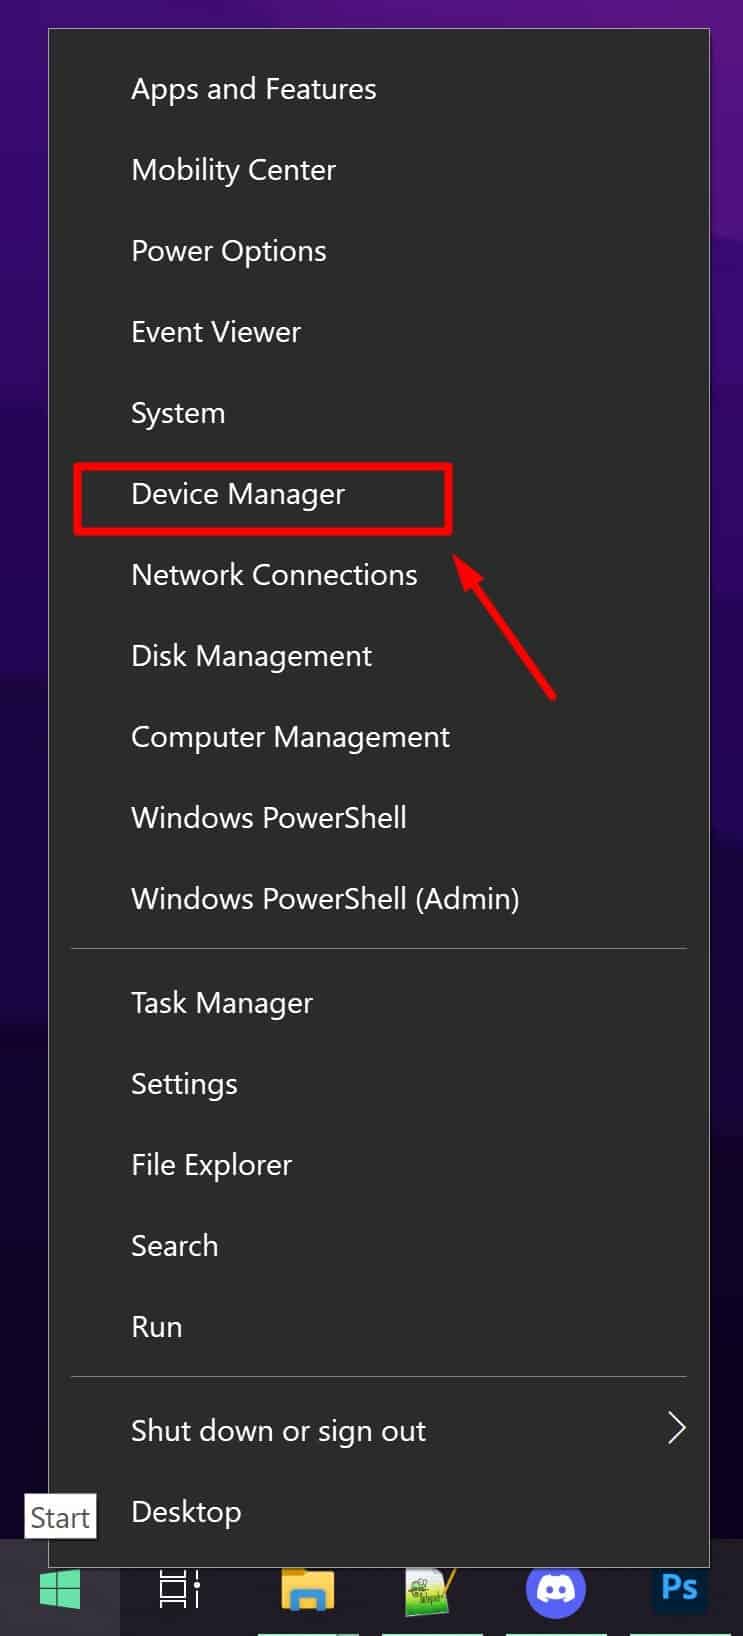 Device Manager 